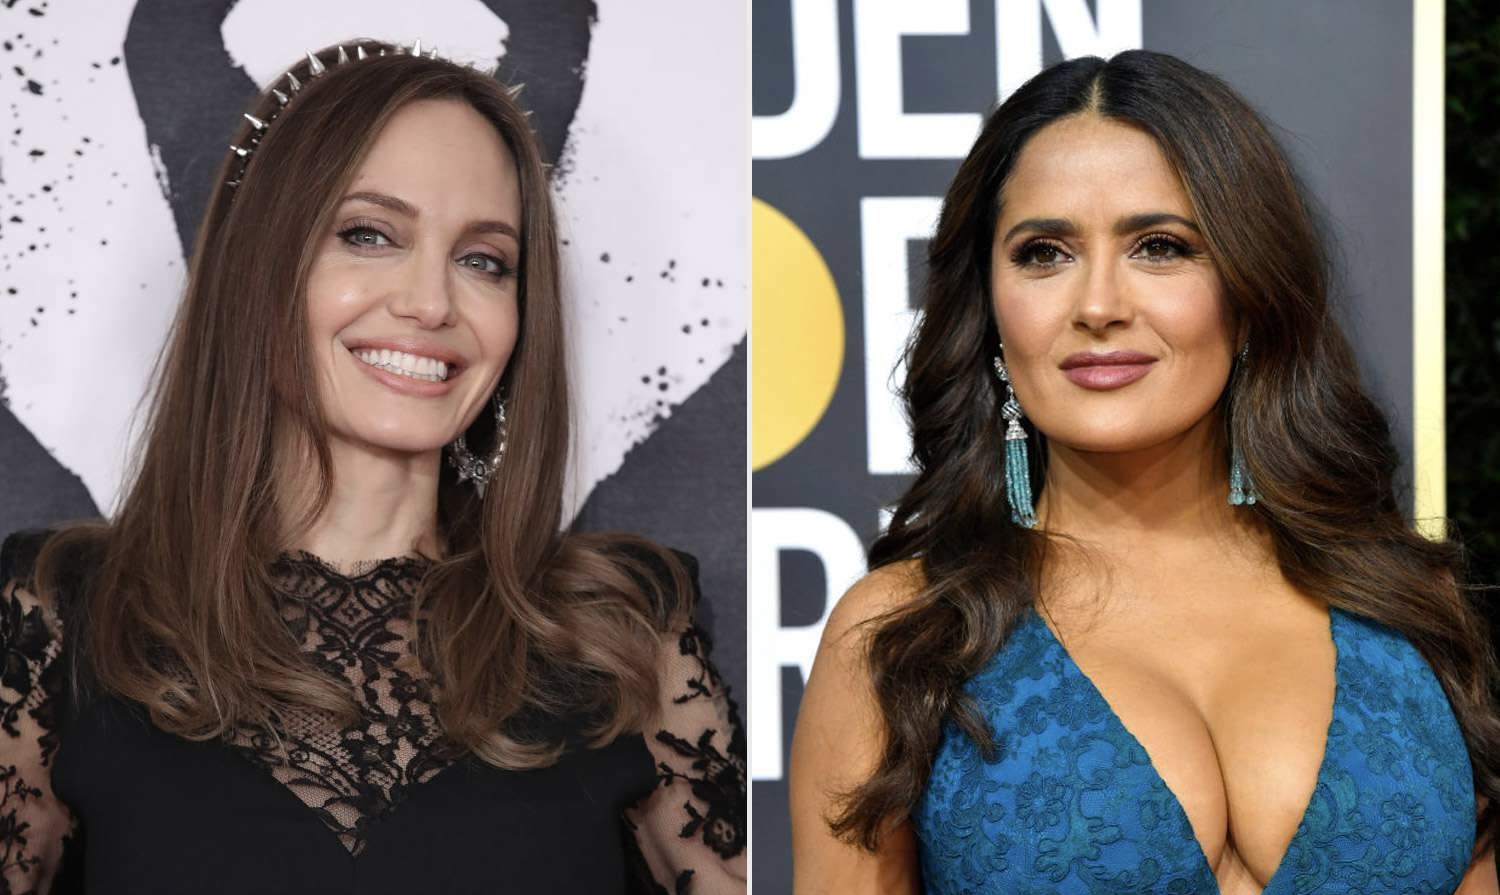 Salma Hayek ‘Working Hard’ to Find Angelina Jolie a Billionaire Businessman Who Will ‘Know How to Handle’ Her